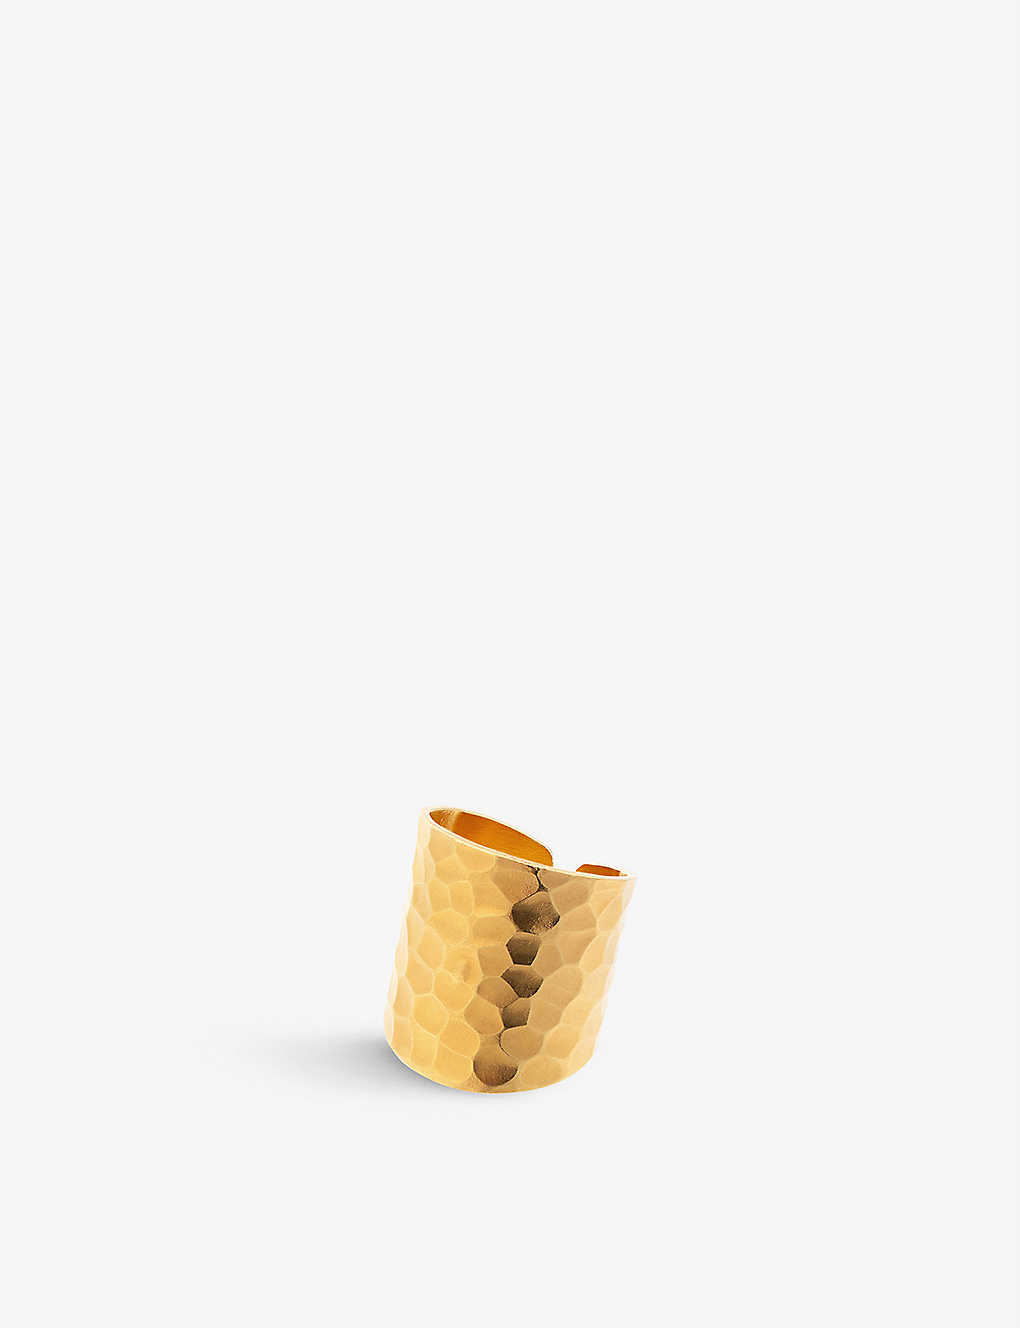 La Maison Couture Amadeus Nudo 14ct Recycled Yellow-gold Vermeil Ring